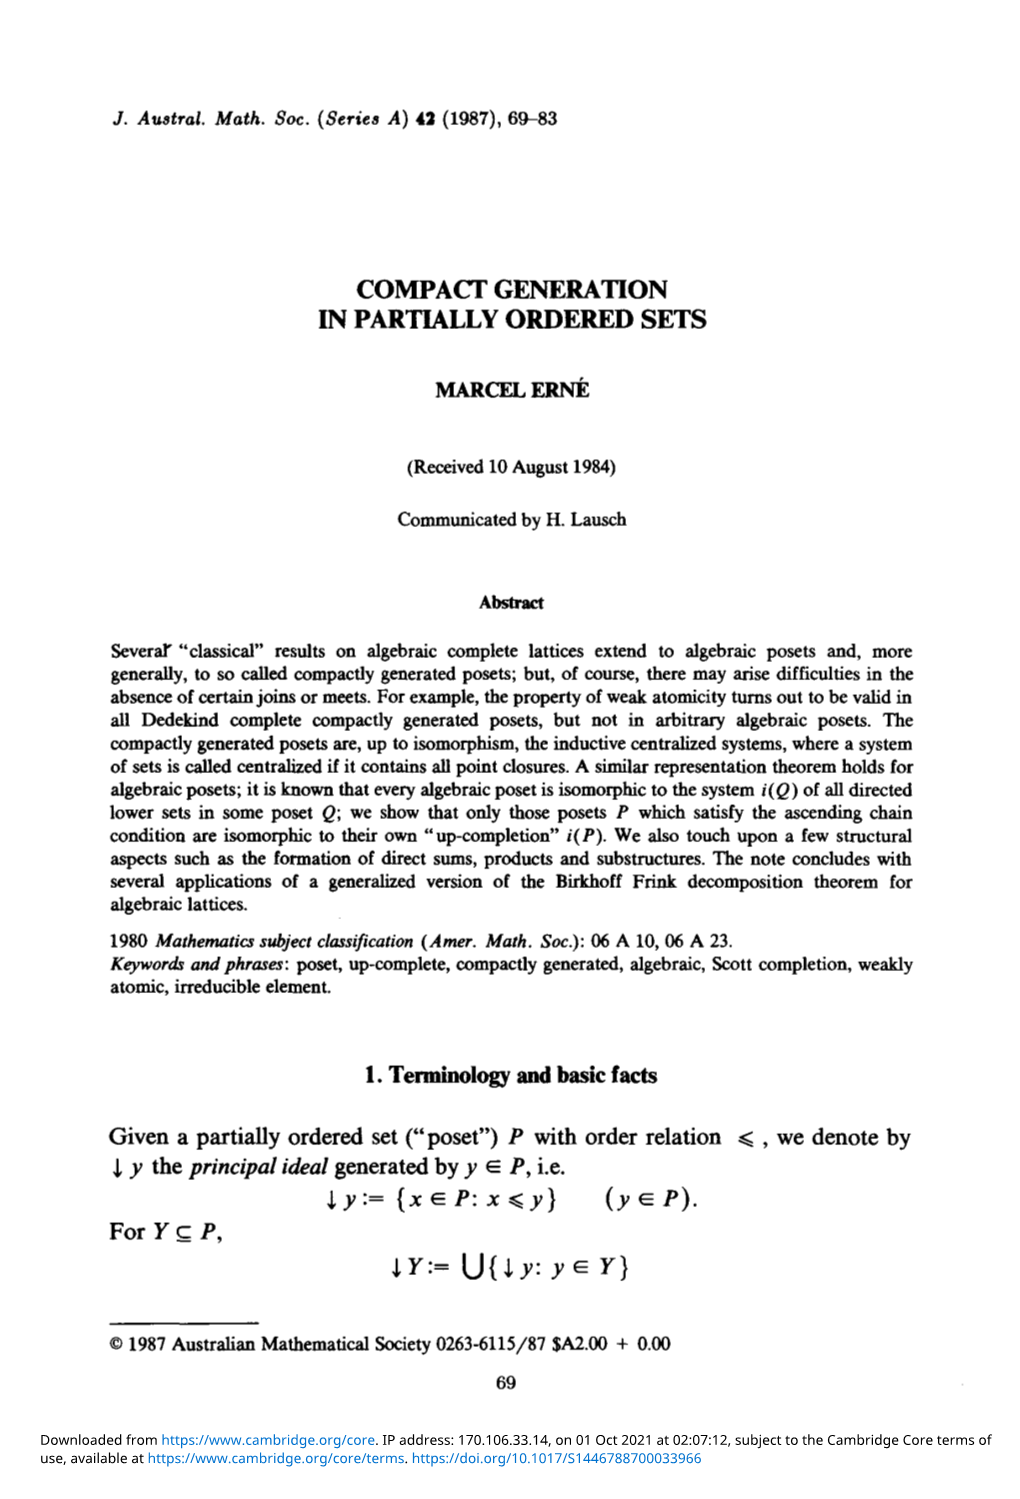 Compact Generation in Partially Ordered Sets